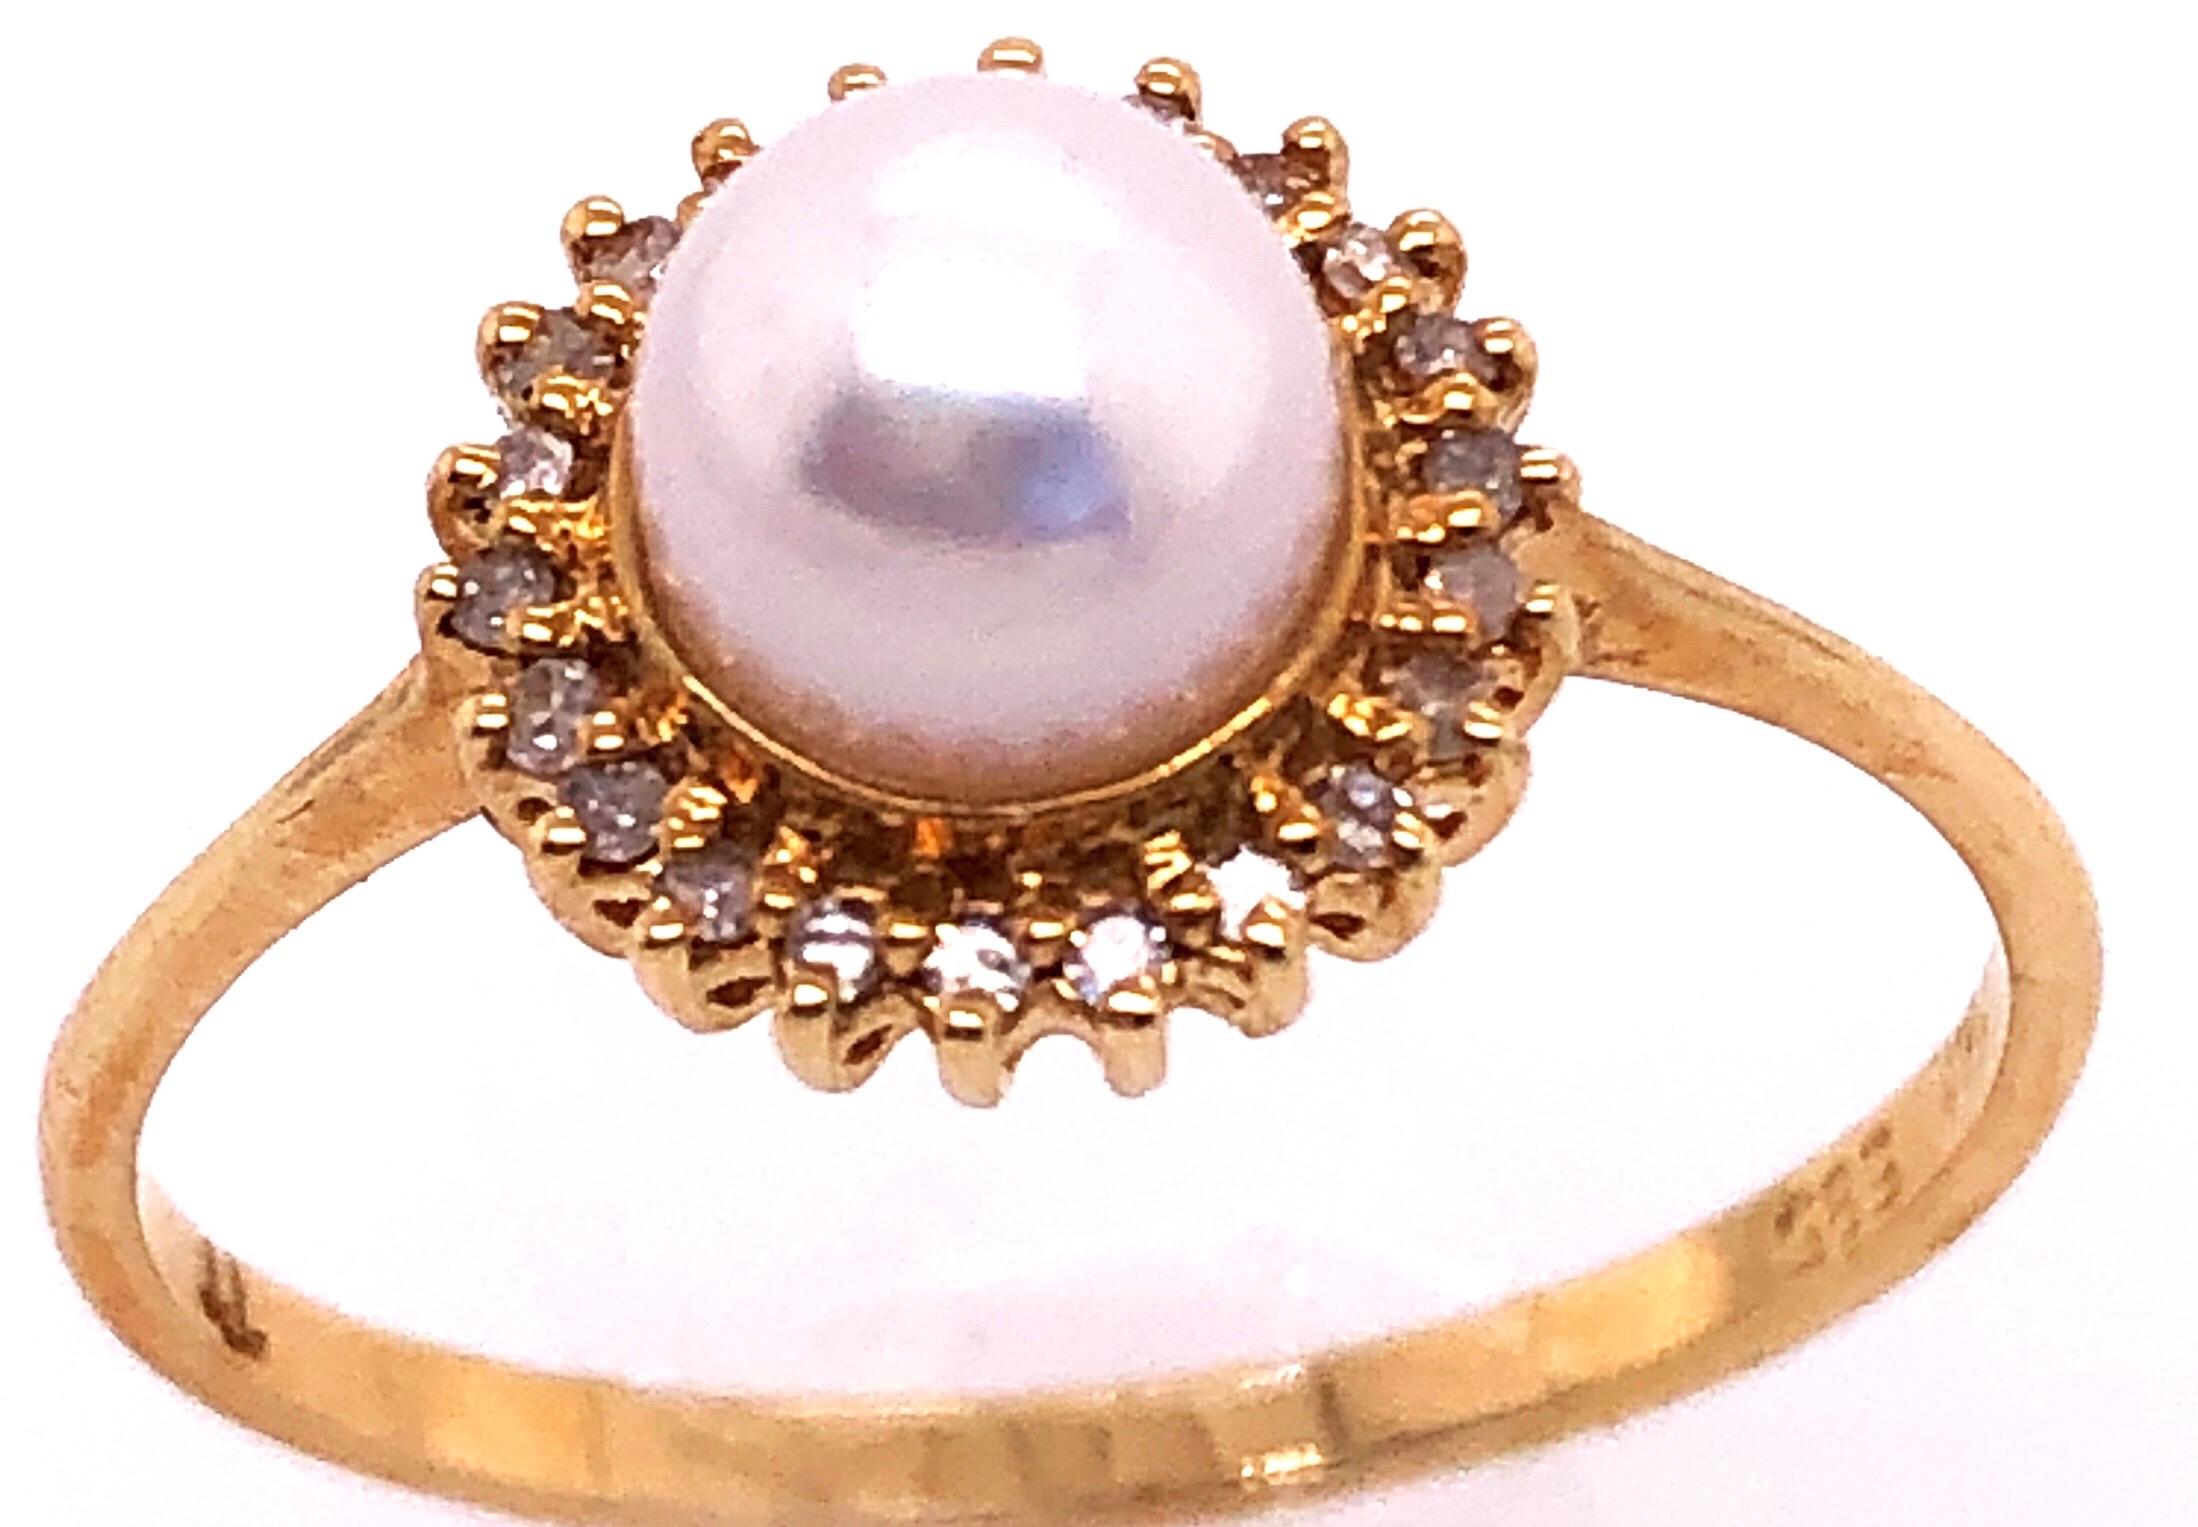 14 Karat Yellow Gold Fashion Pearl Ring with Diamonds Size 7.
5 mm diameter pearl.
1.8 grams total weight.